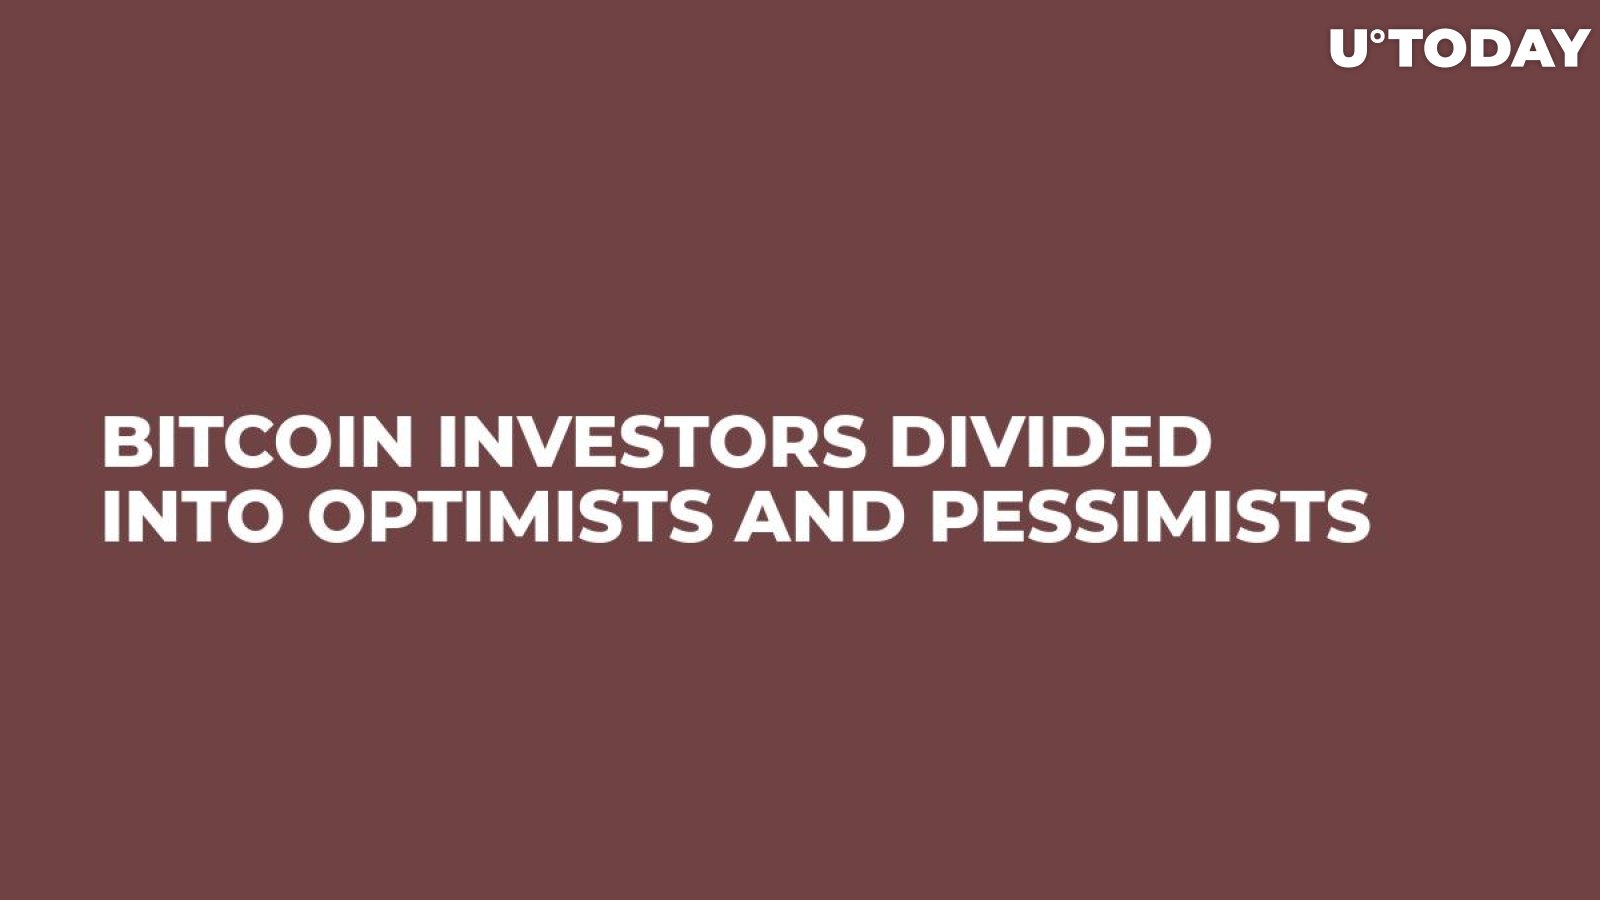 Bitcoin Investors Divided Into Optimists And Pessimists